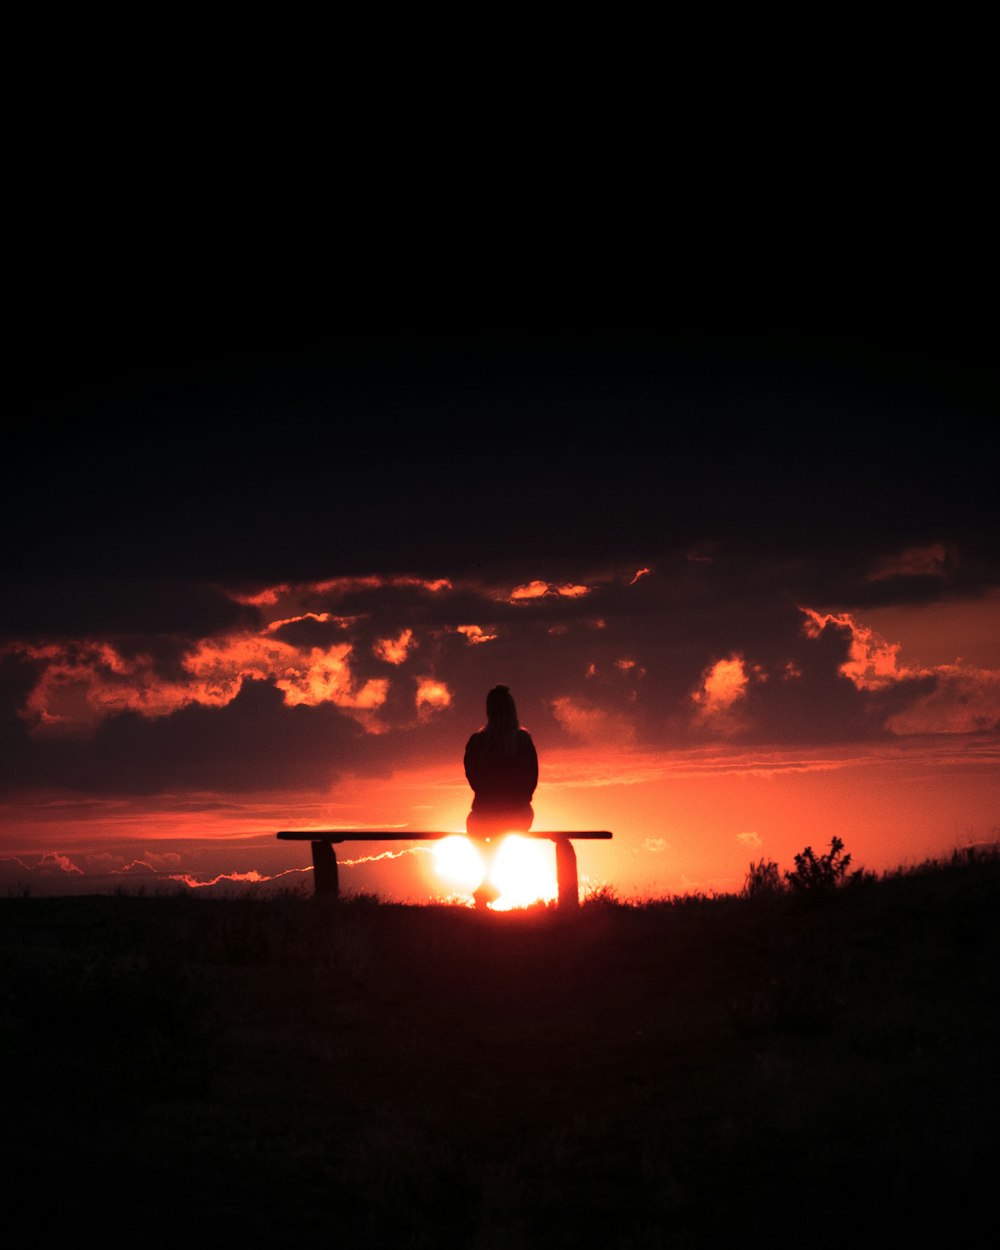 silhouette of person standing on grass field during sunset